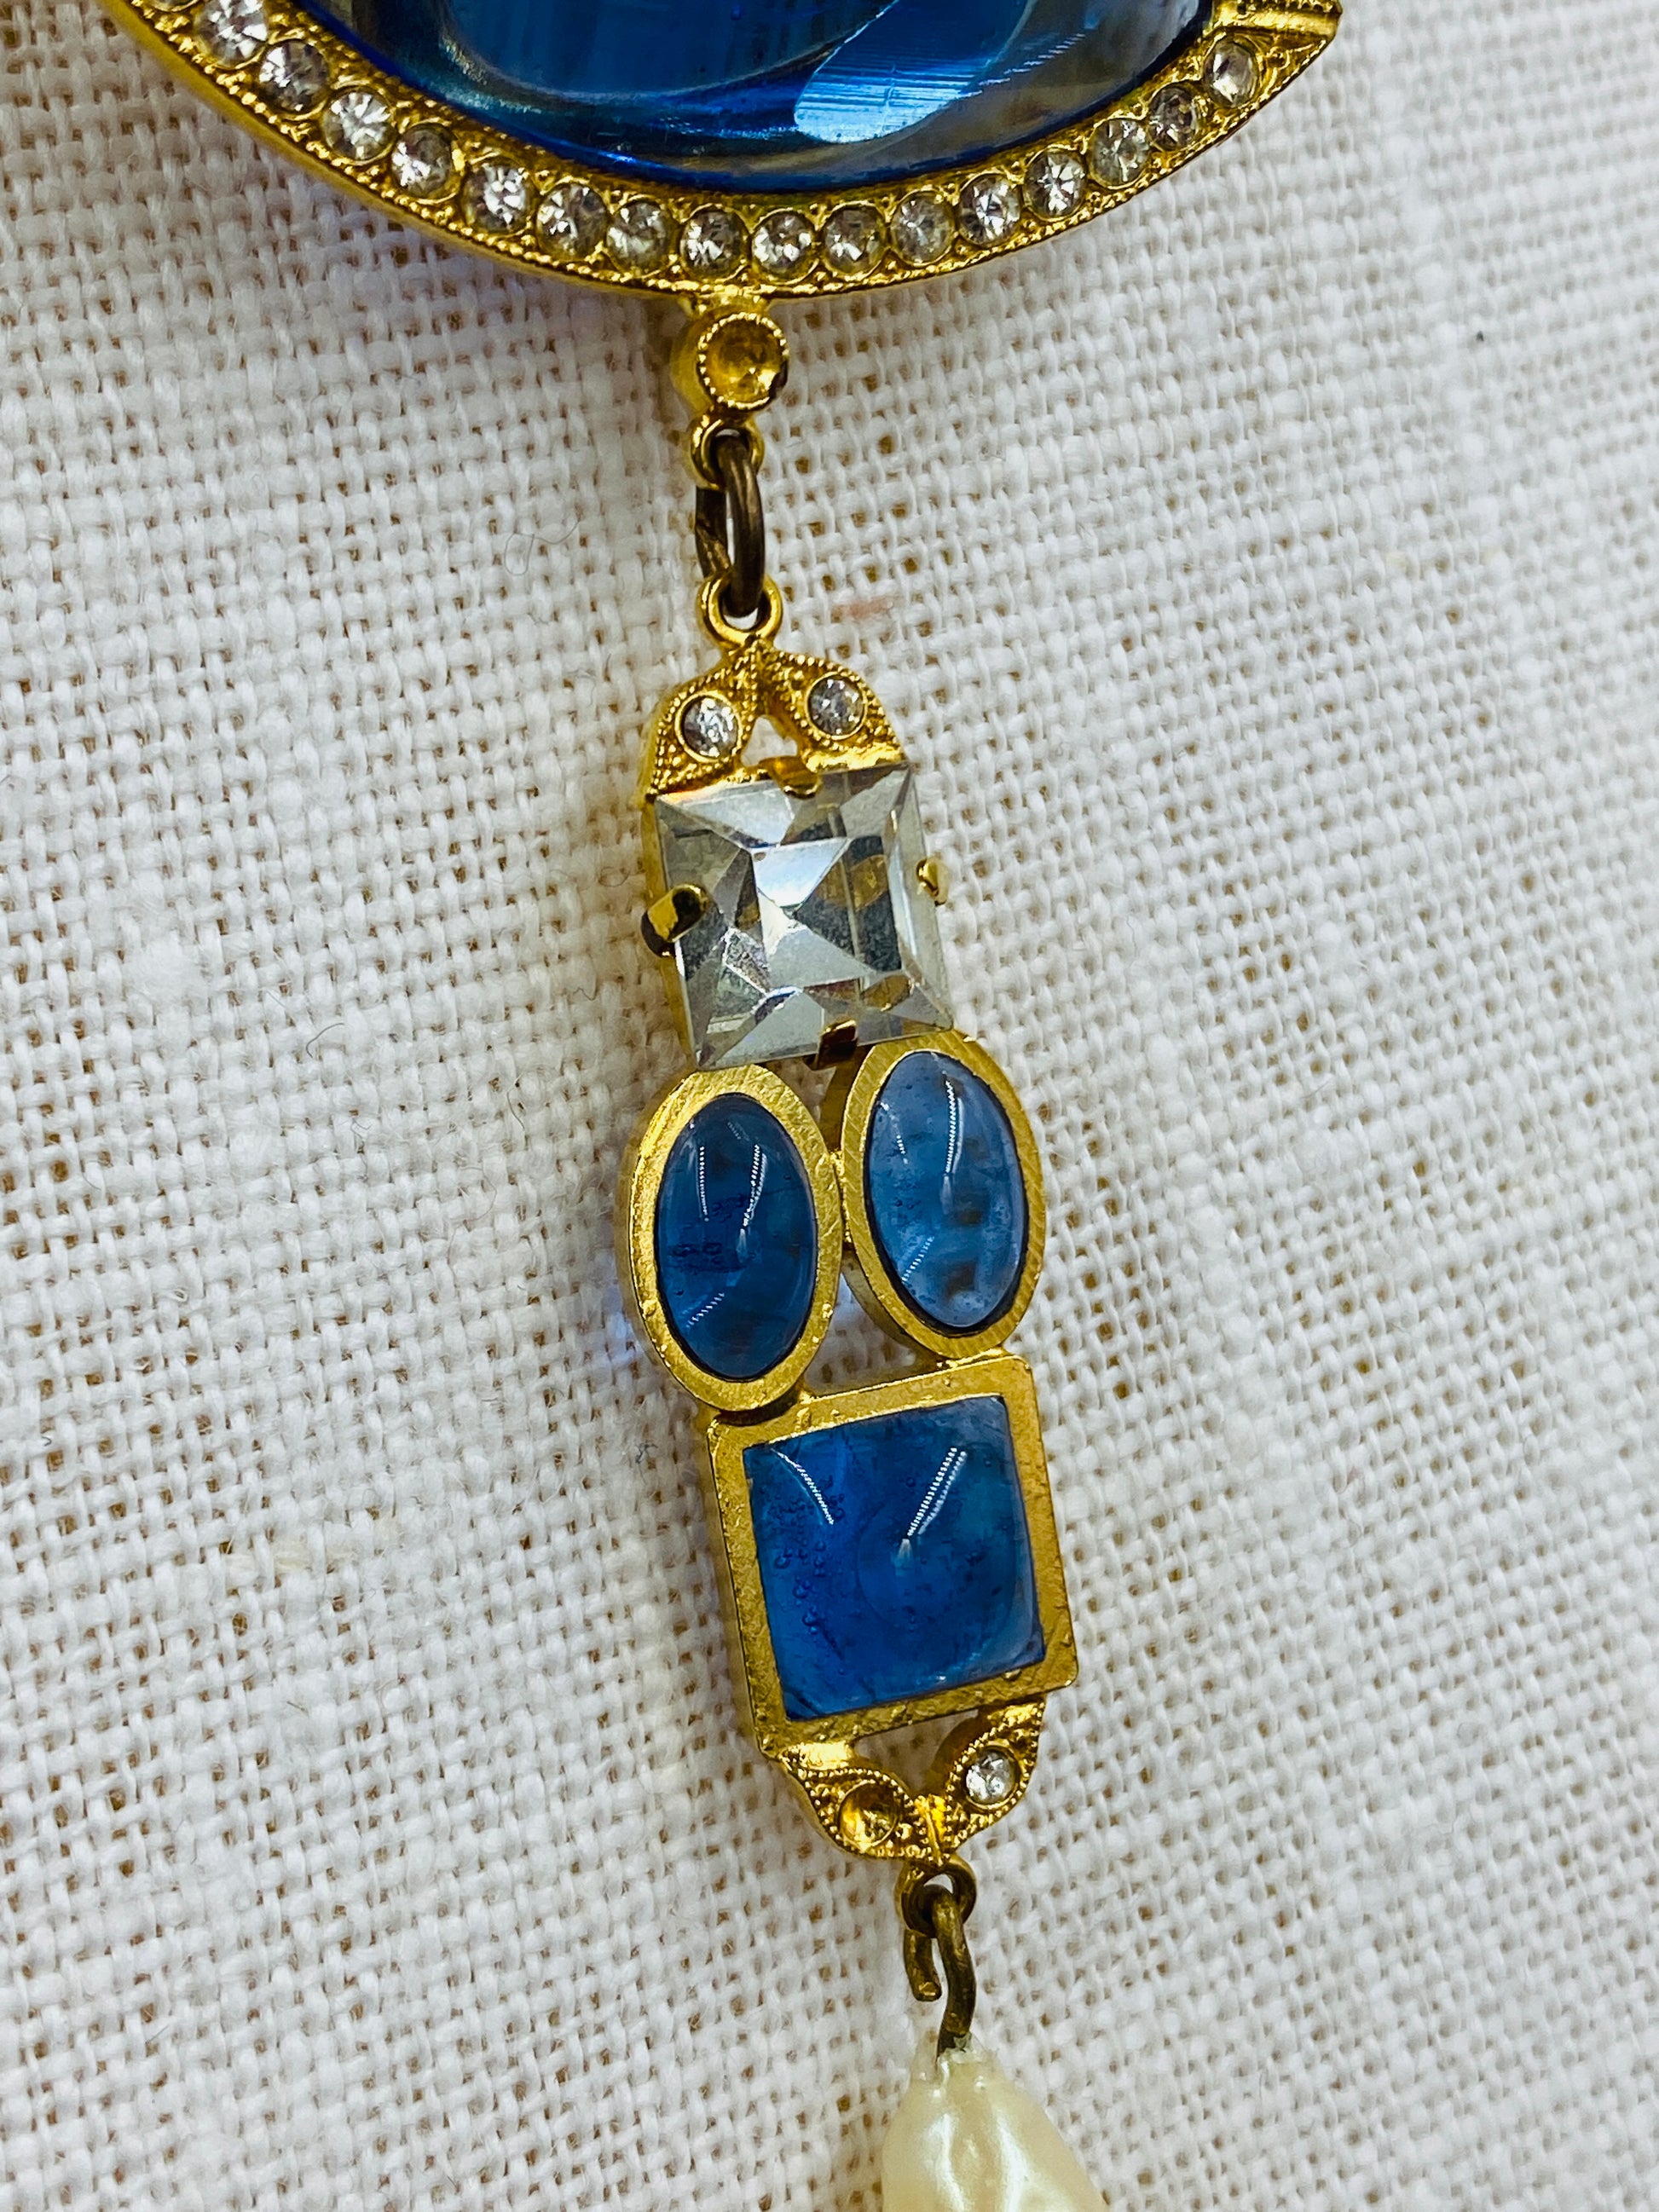 Vintage Butler & Wilson Goldtone Chunky Chain Necklace with Pearldrop & Blue Crystals 